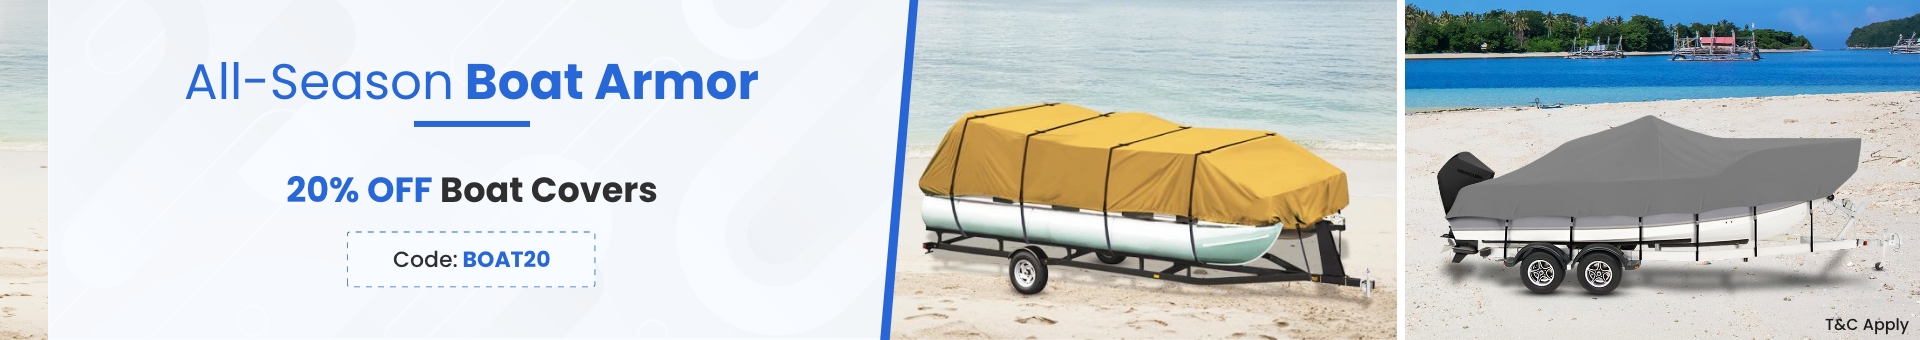 BOAT COVERS CAMPAIGN_May 6 - Dec 31